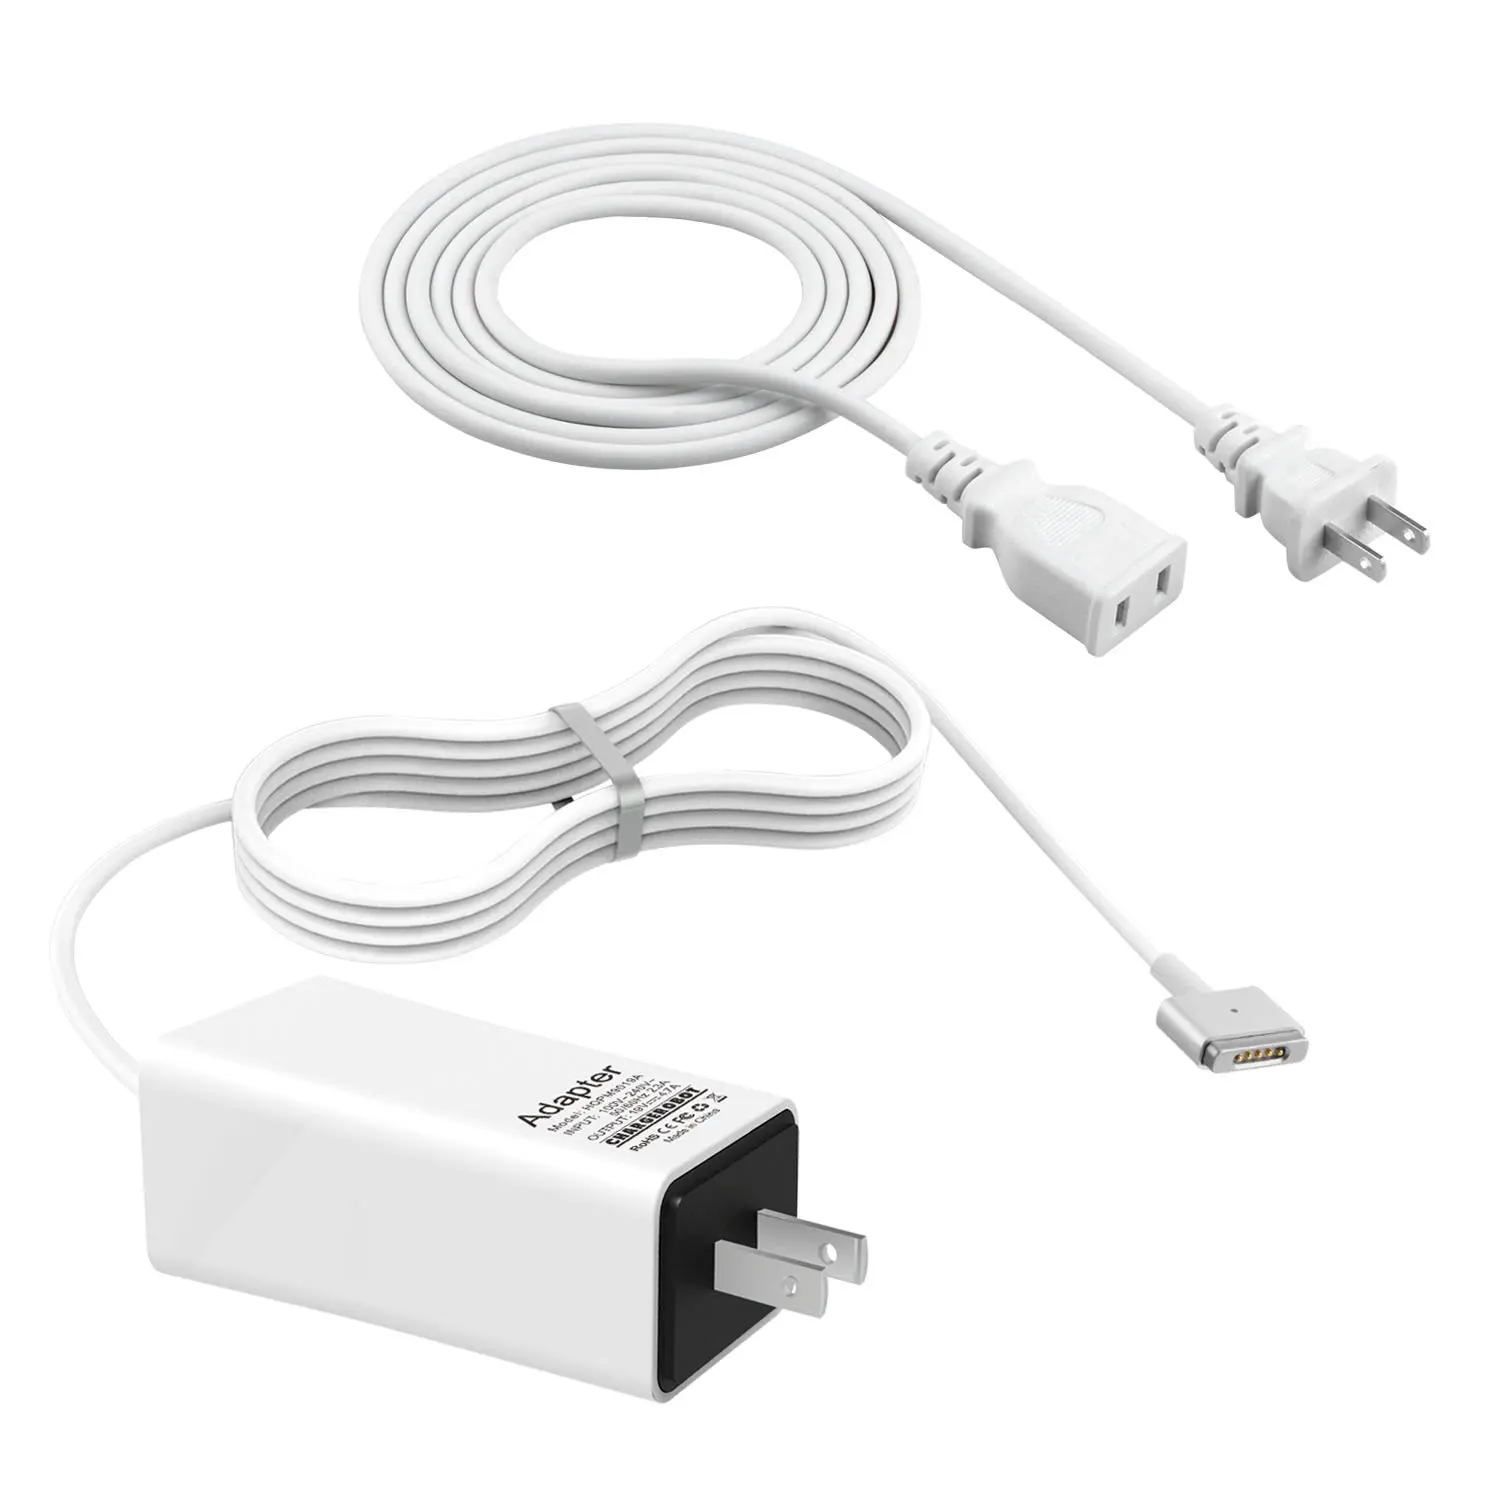 Buy Wakeach 85w Magnetic 2nd Gen T Shaped Power Charger Adapter For Apple 15 Inch Macbook Pro With Retina Display In Cheap Price On Alibaba Com